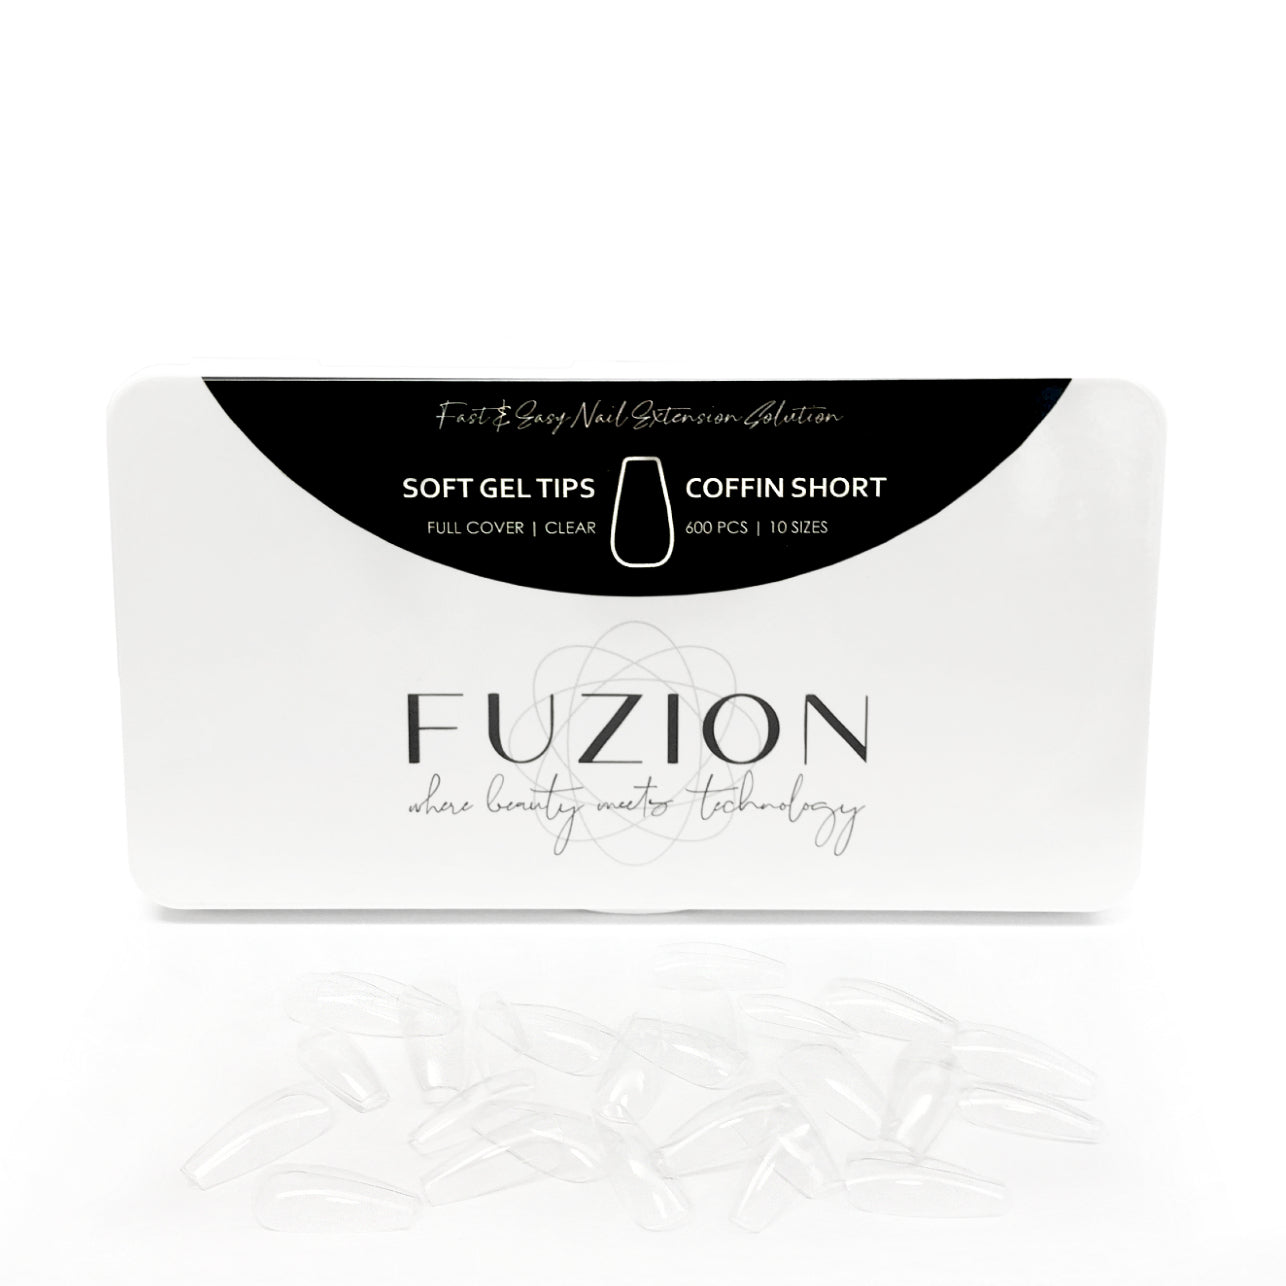 Fuzion Soft Gel Tips - Coffin Short 600pc - Creata Beauty - Professional Beauty Products